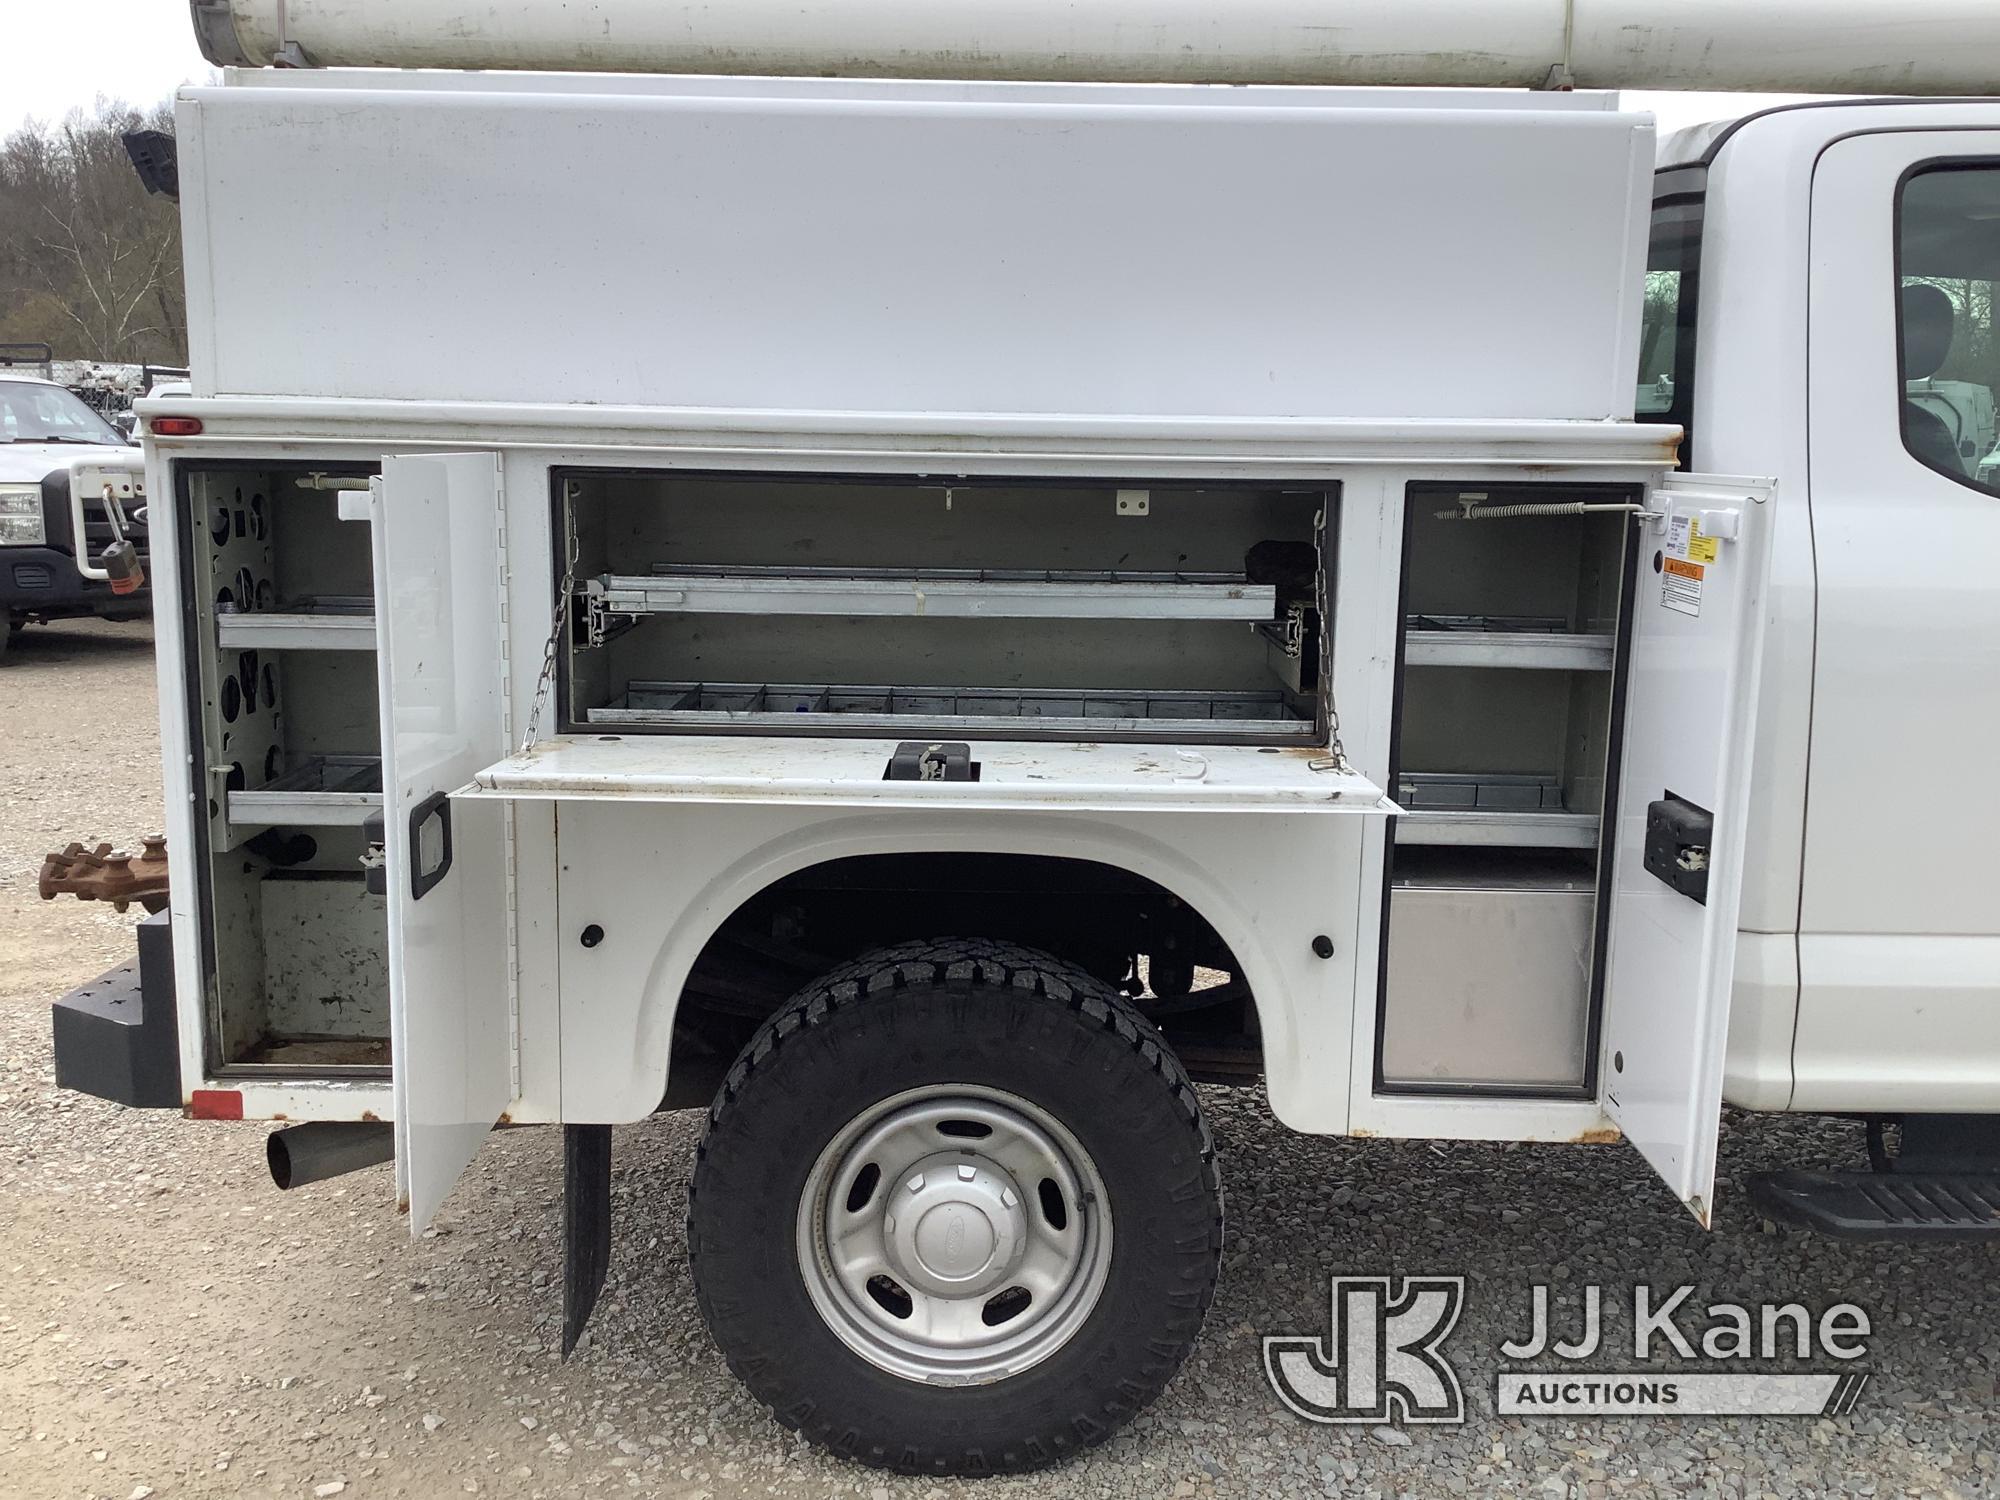 (Smock, PA) 2017 Ford F250 4x4 Enclosed Service Truck Runs & Moves, Rust Damage